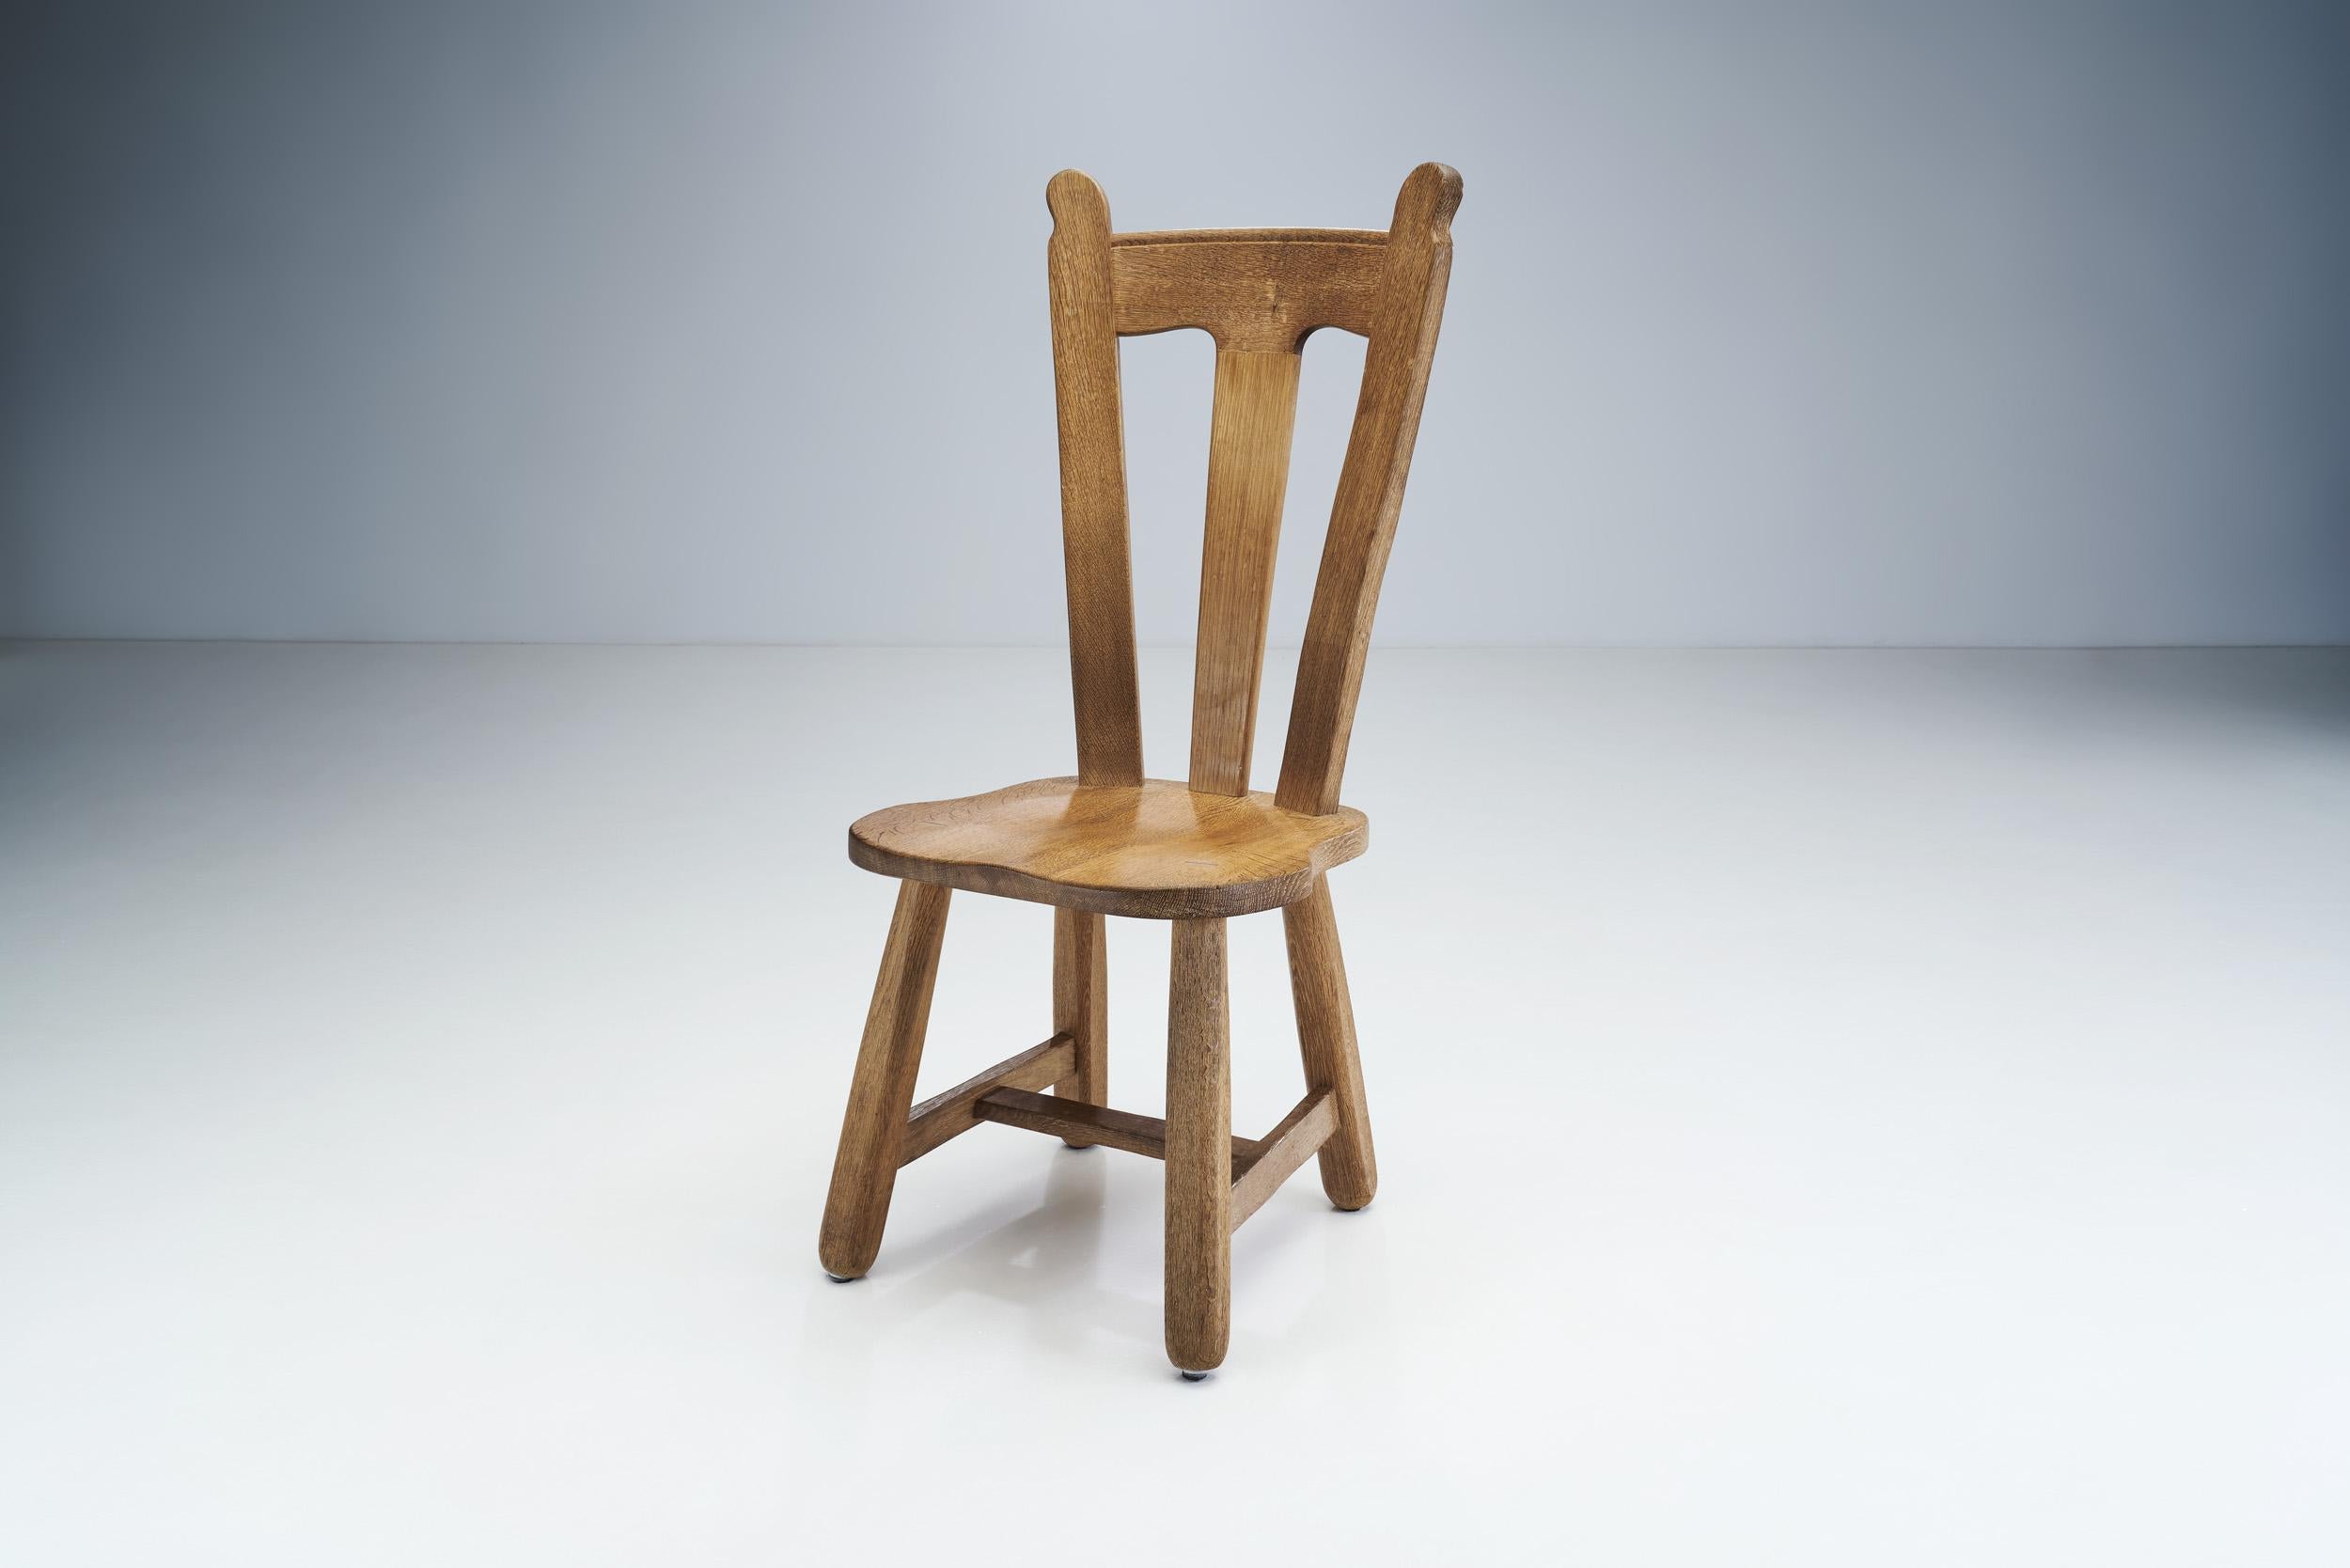 Late 20th Century Belgian Brutalist Oak Dining Chairs, Belgium 1970s For Sale